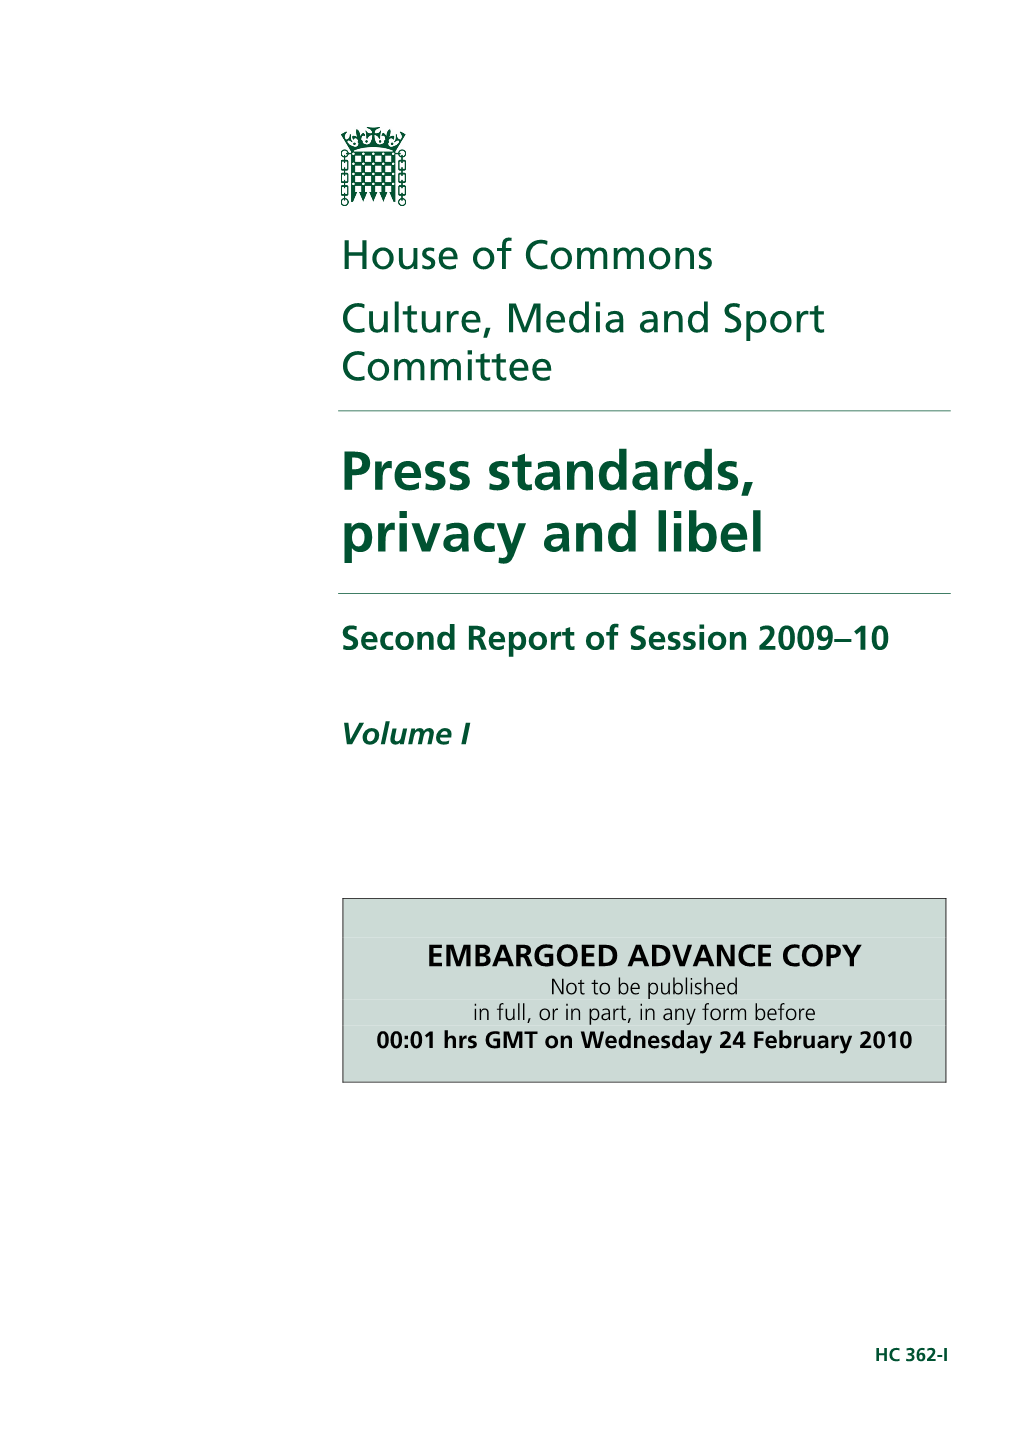 Press Standards, Privacy and Libel